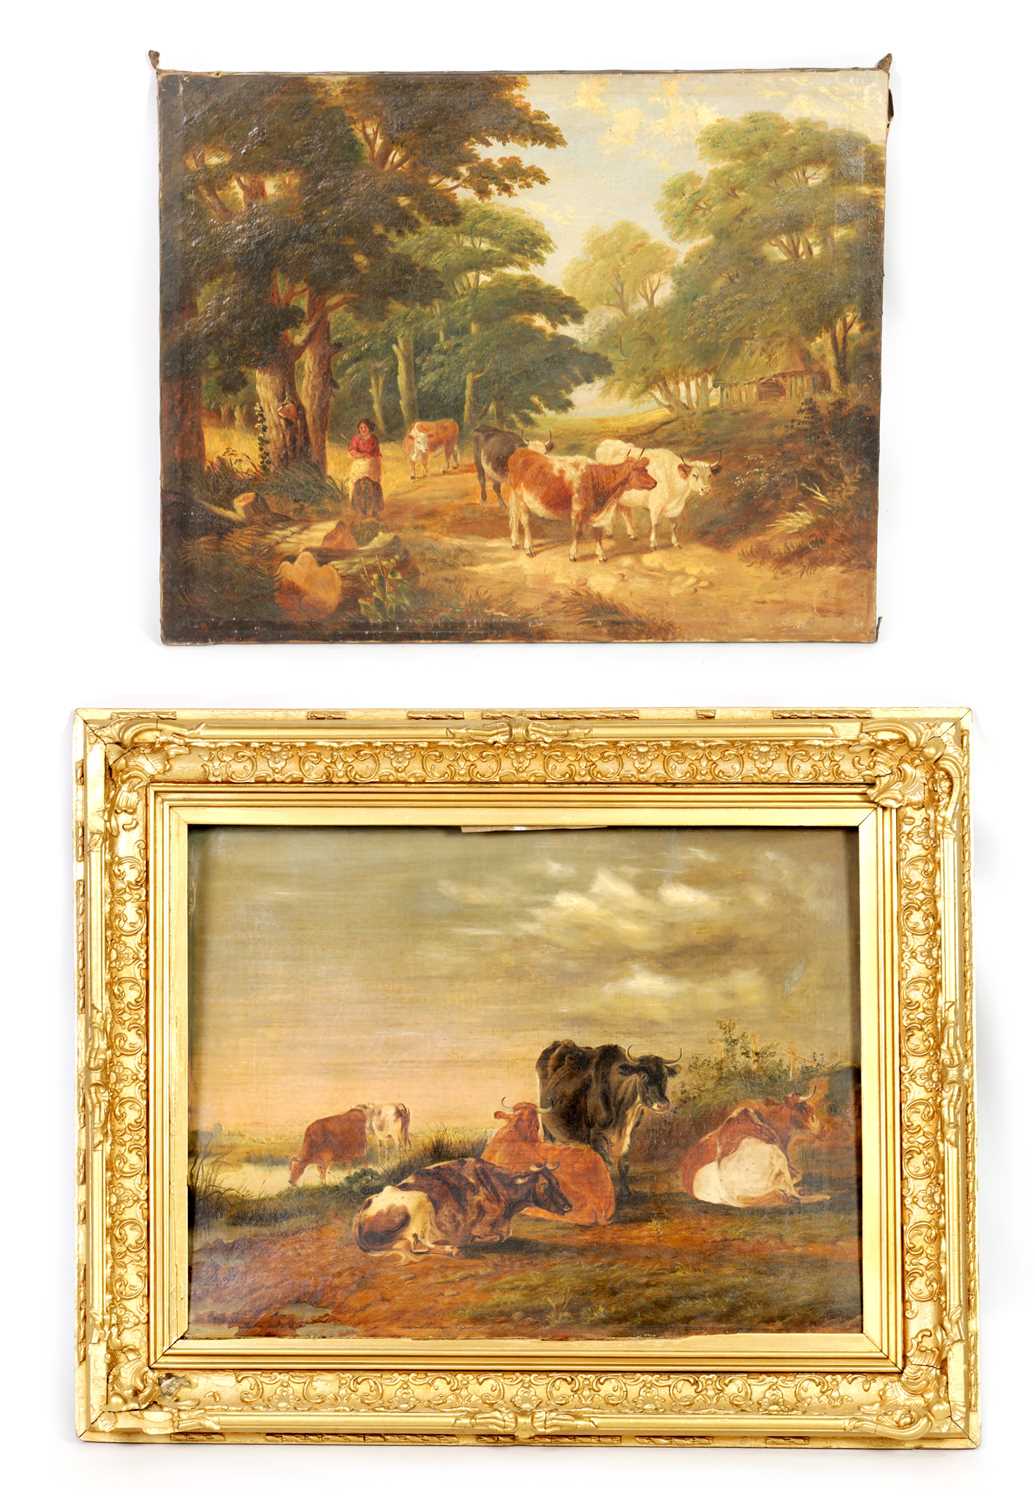 Lot 756 - A PAIR OF 19TH CENTURY OILS ON CANVAS